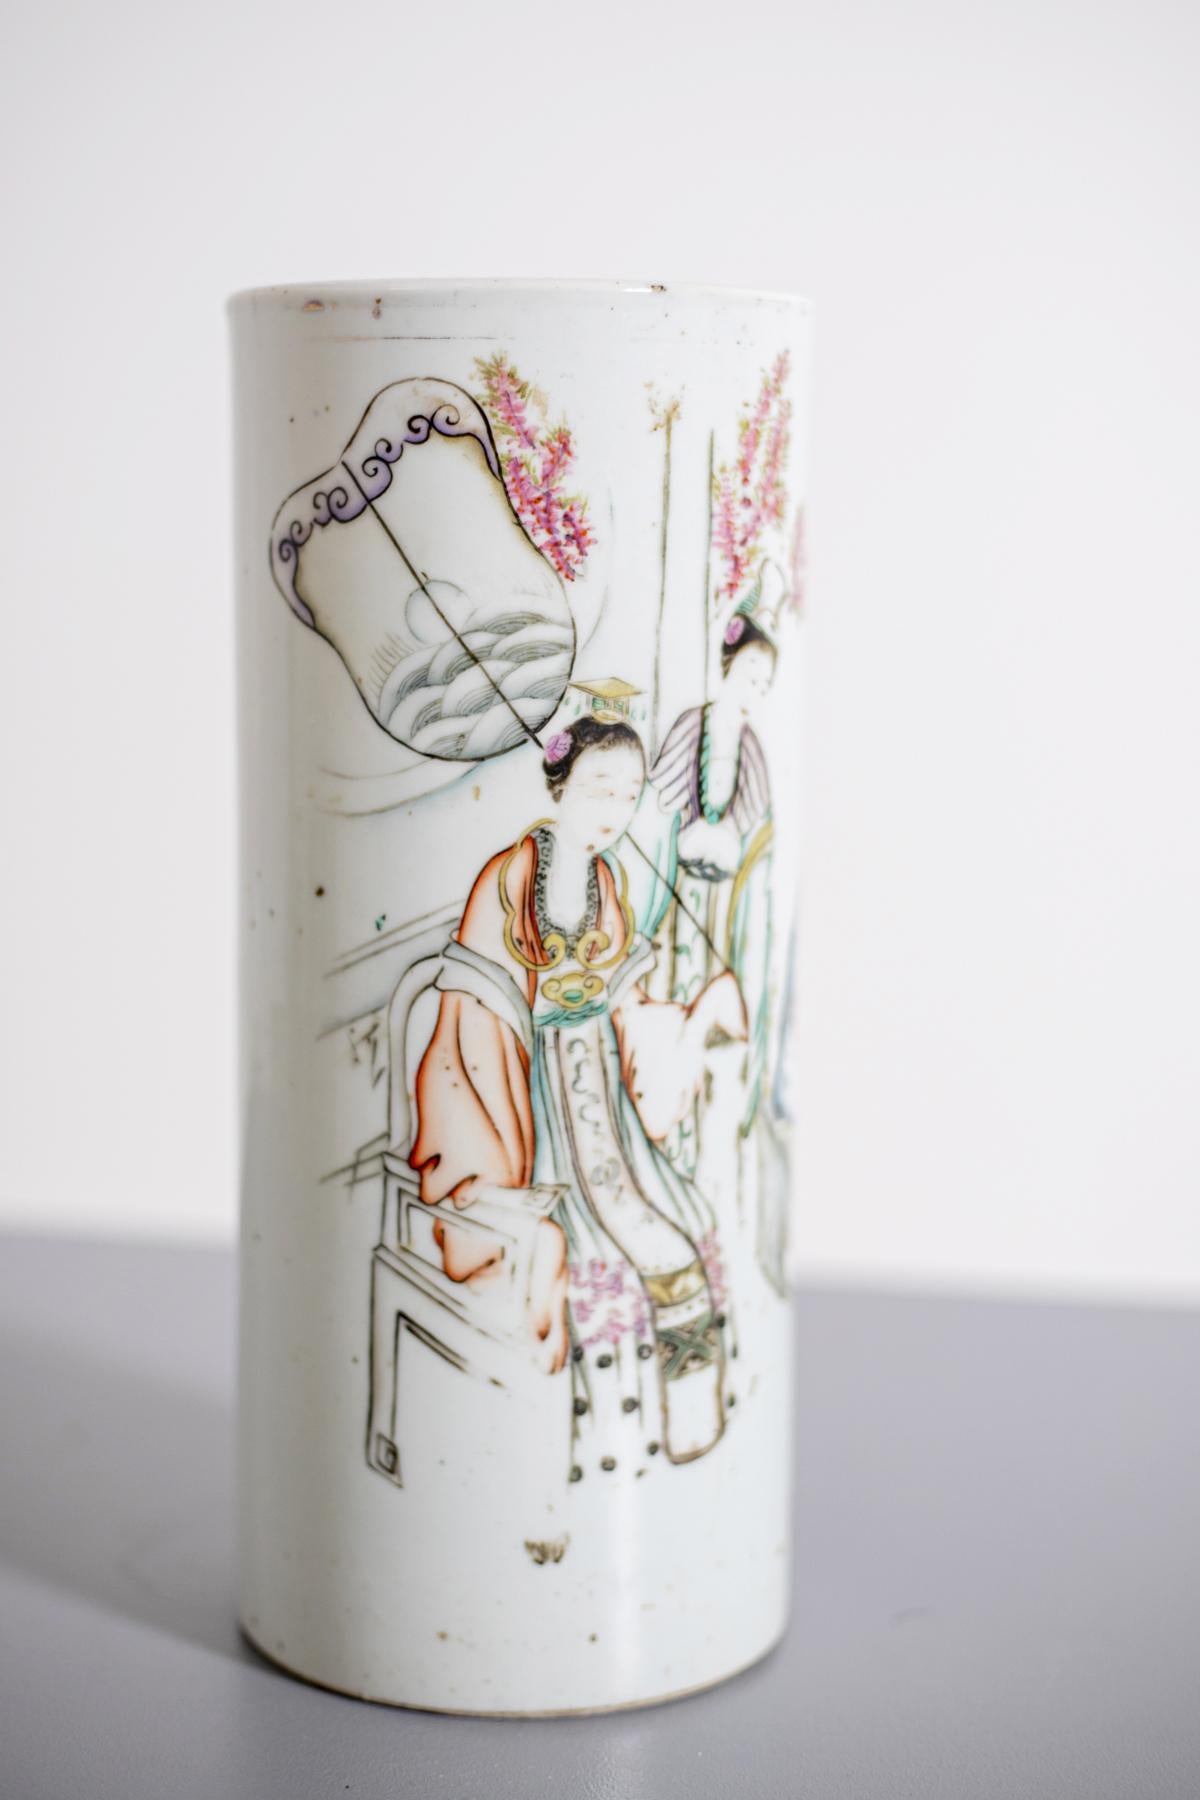 Porcelain vase, Chinese polychrome decoration with characters and ideograms. This vase was created at the end of the 19th century, entirely made of durable white porcelain, with decoration.
In this vase, we see a definitely high-ranking woman being